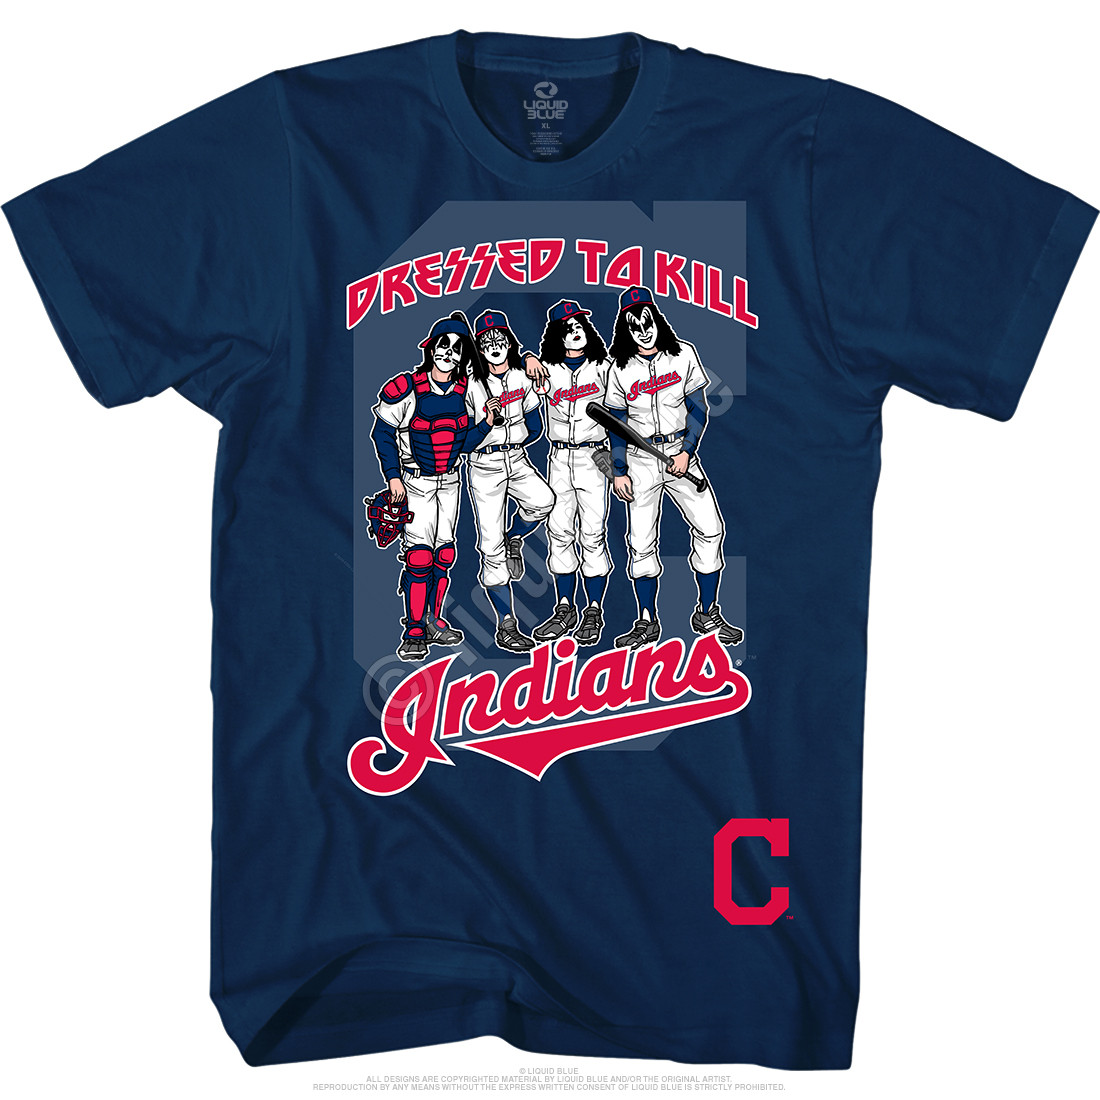 where to buy cleveland indians shirts